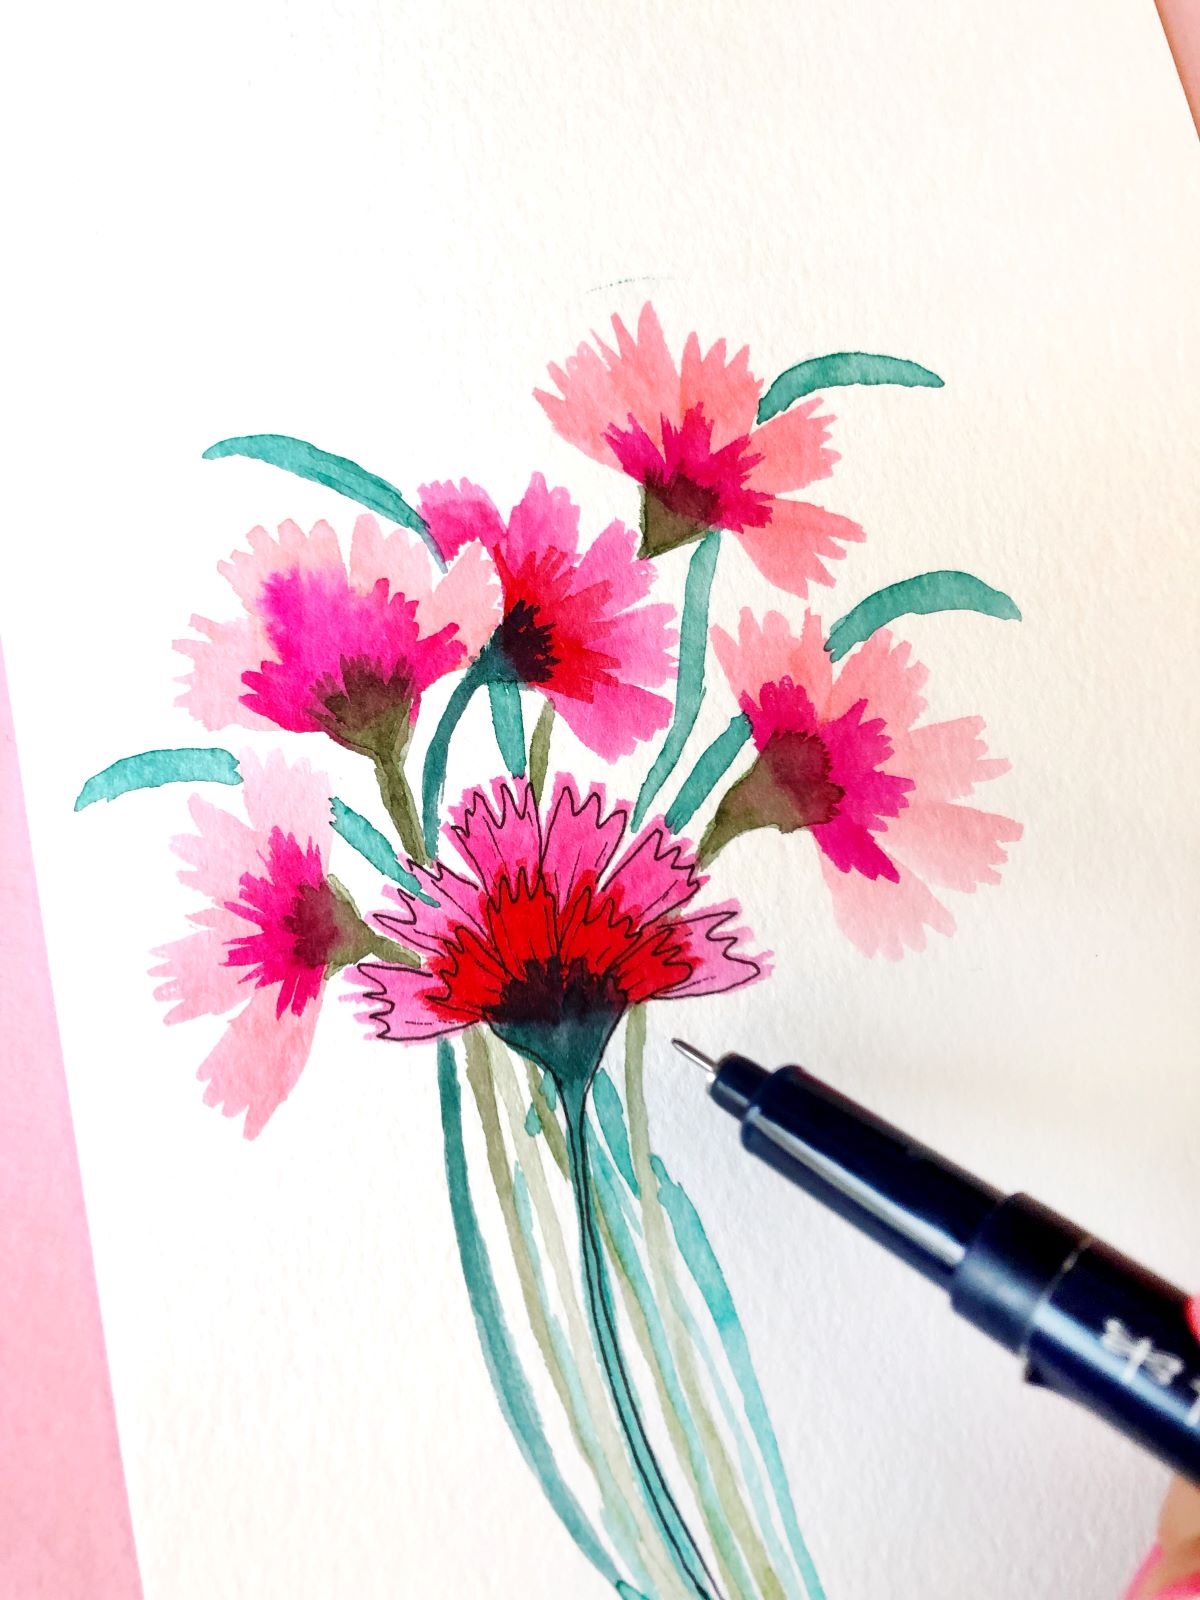 Create Simple Watercolor Flowers - Tombow USA Blog